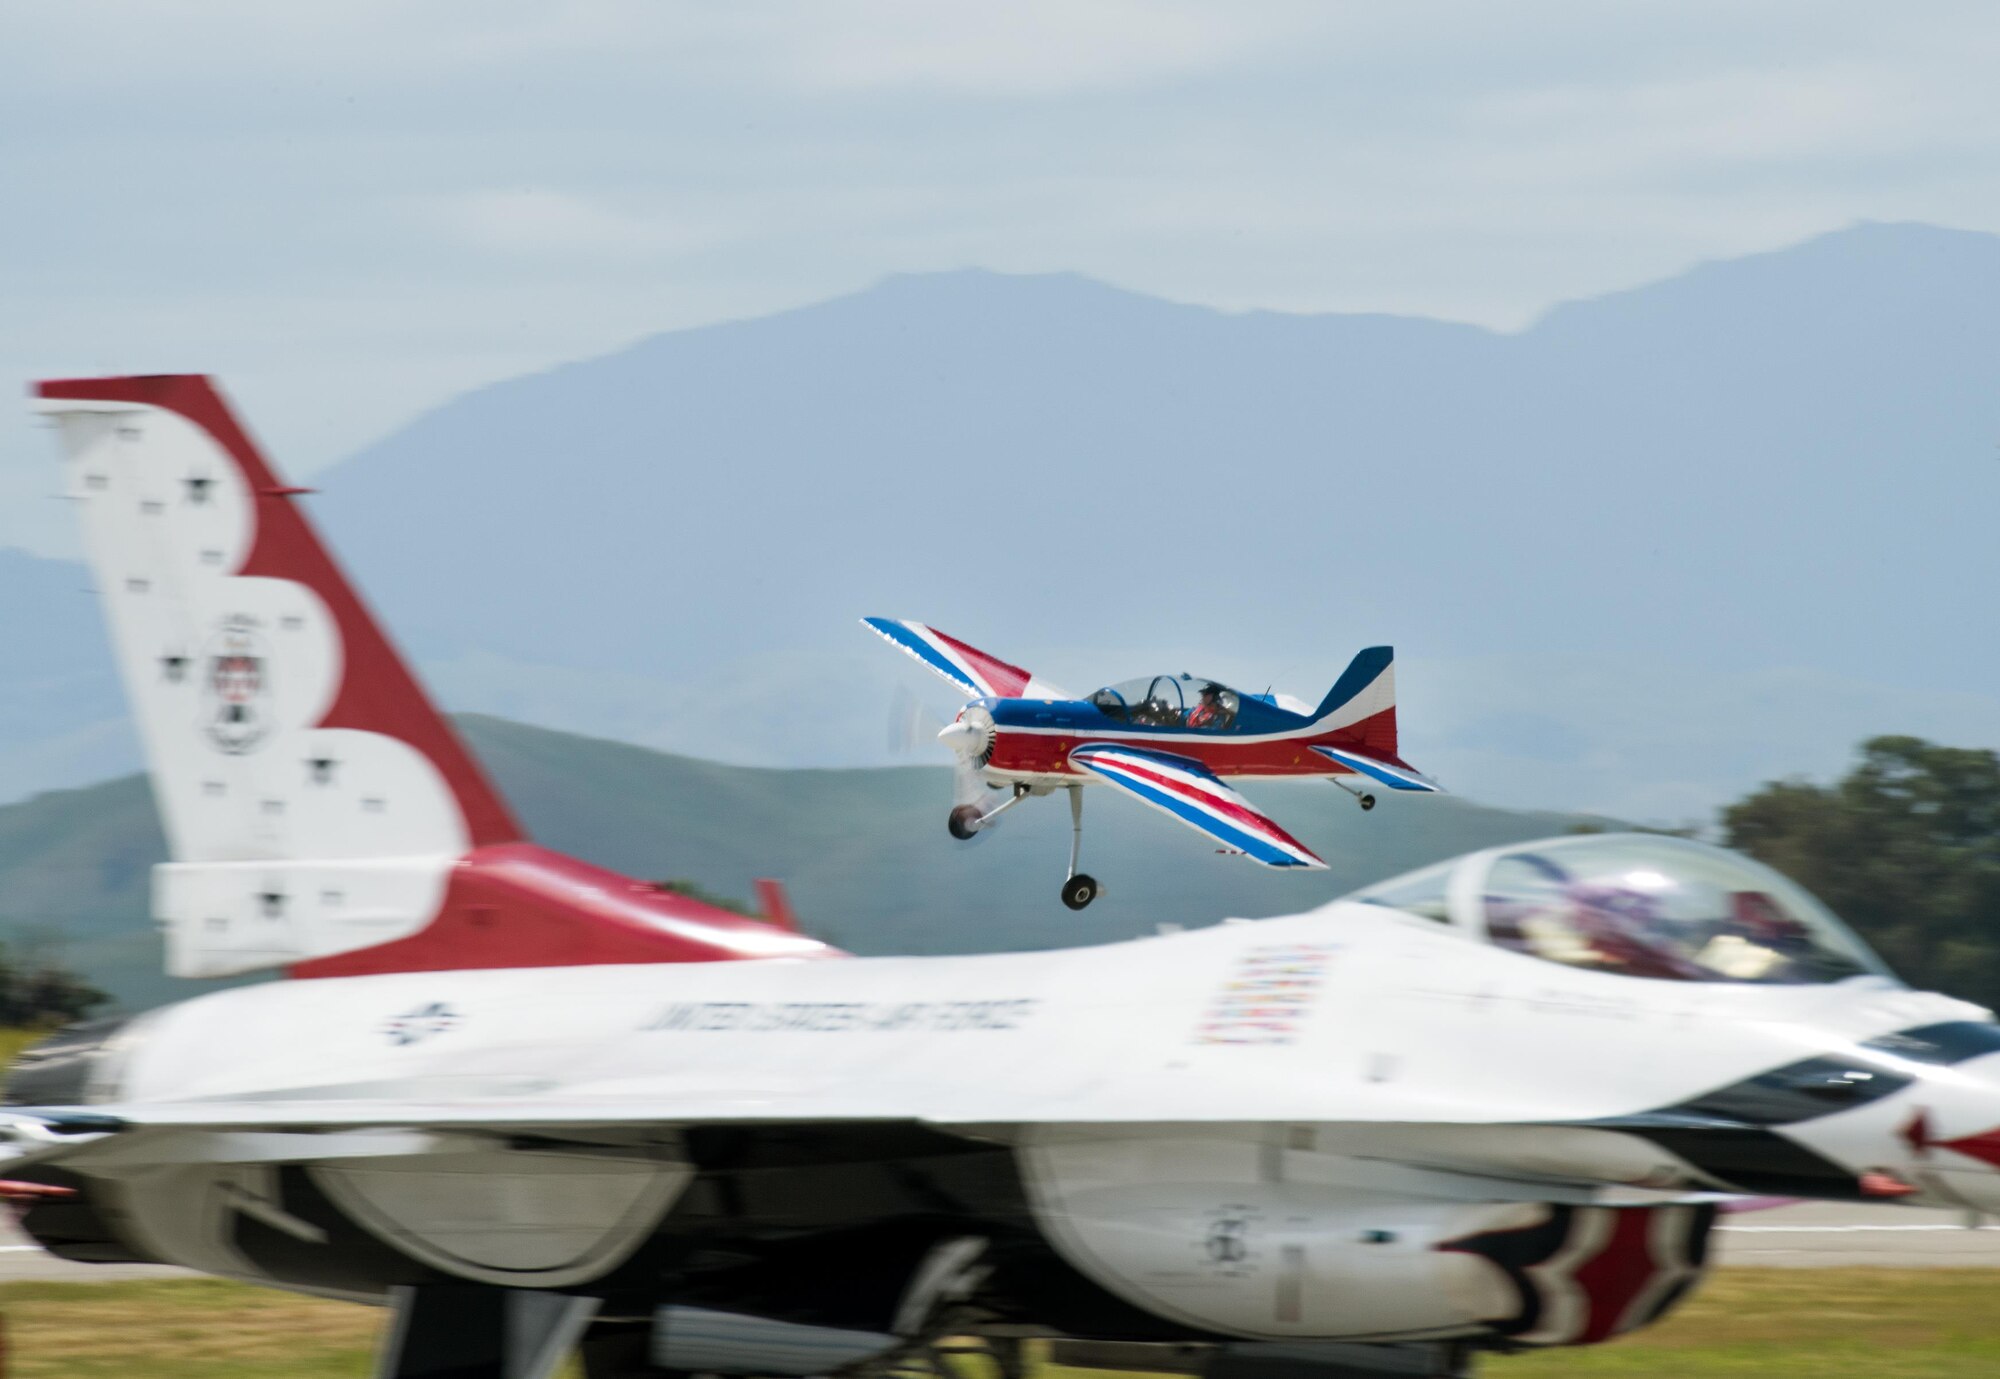 Rich Perkins flys a Russian Thunder YAK-54 during the Wings Over Solano Air Show at Travis Air Force Base, Calif., May 6, 2017. The two-day event featured performances by the United States Air Force Thunderbirds aerial demonstration team, flyovers and static displays. (U.S. Air Force photo by Louis Briscese)